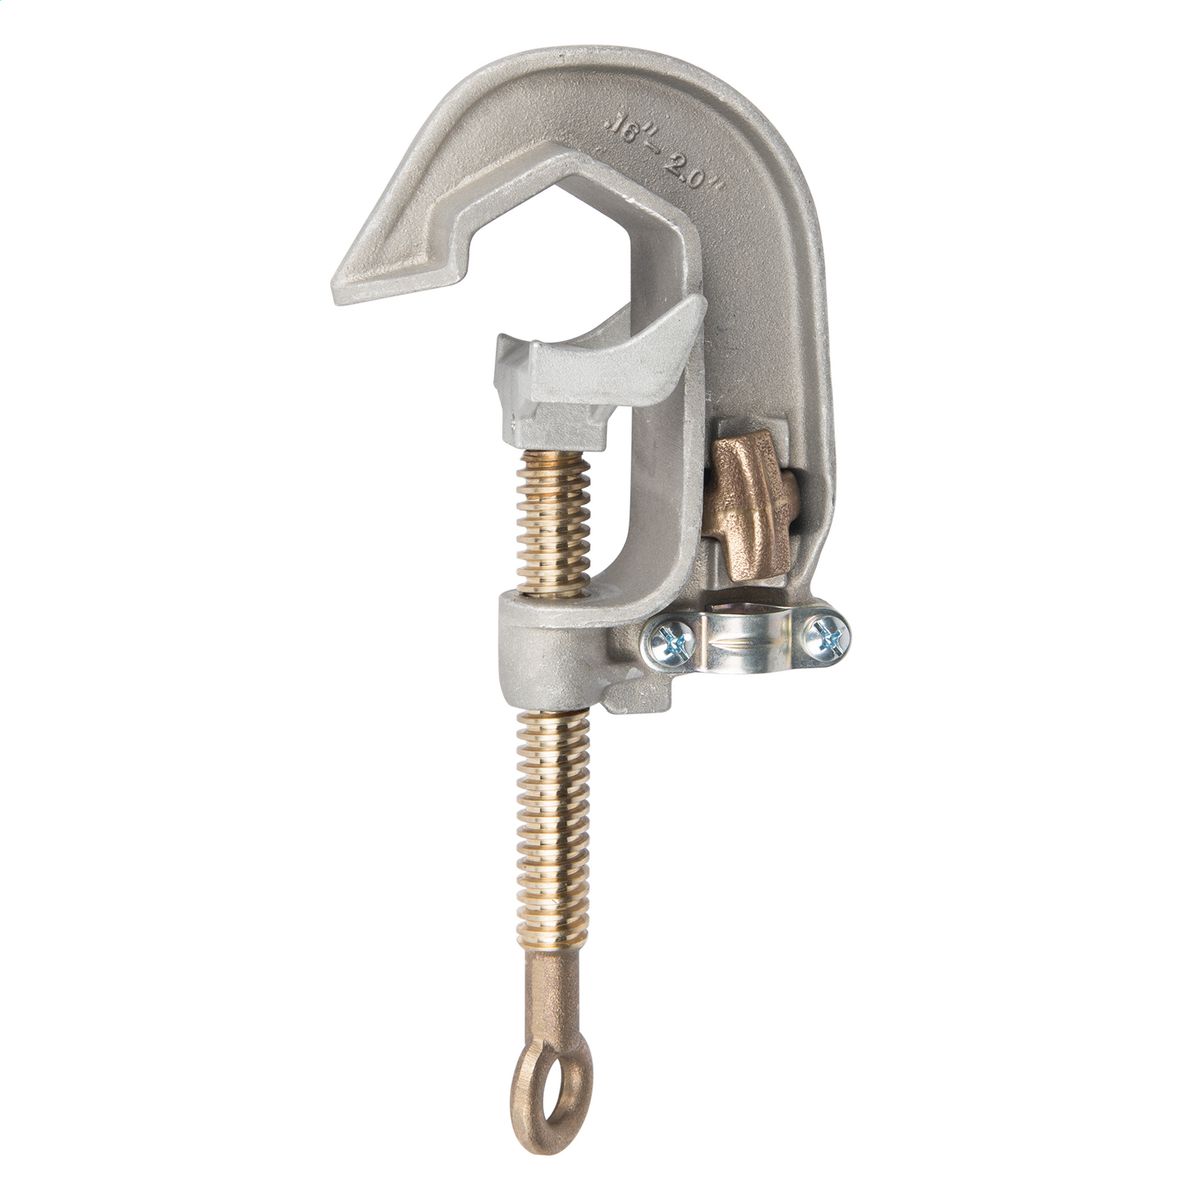 Ground Clamp - C-Type I-A-5 2" Jaw Opening | "C" Clamp | Clamps